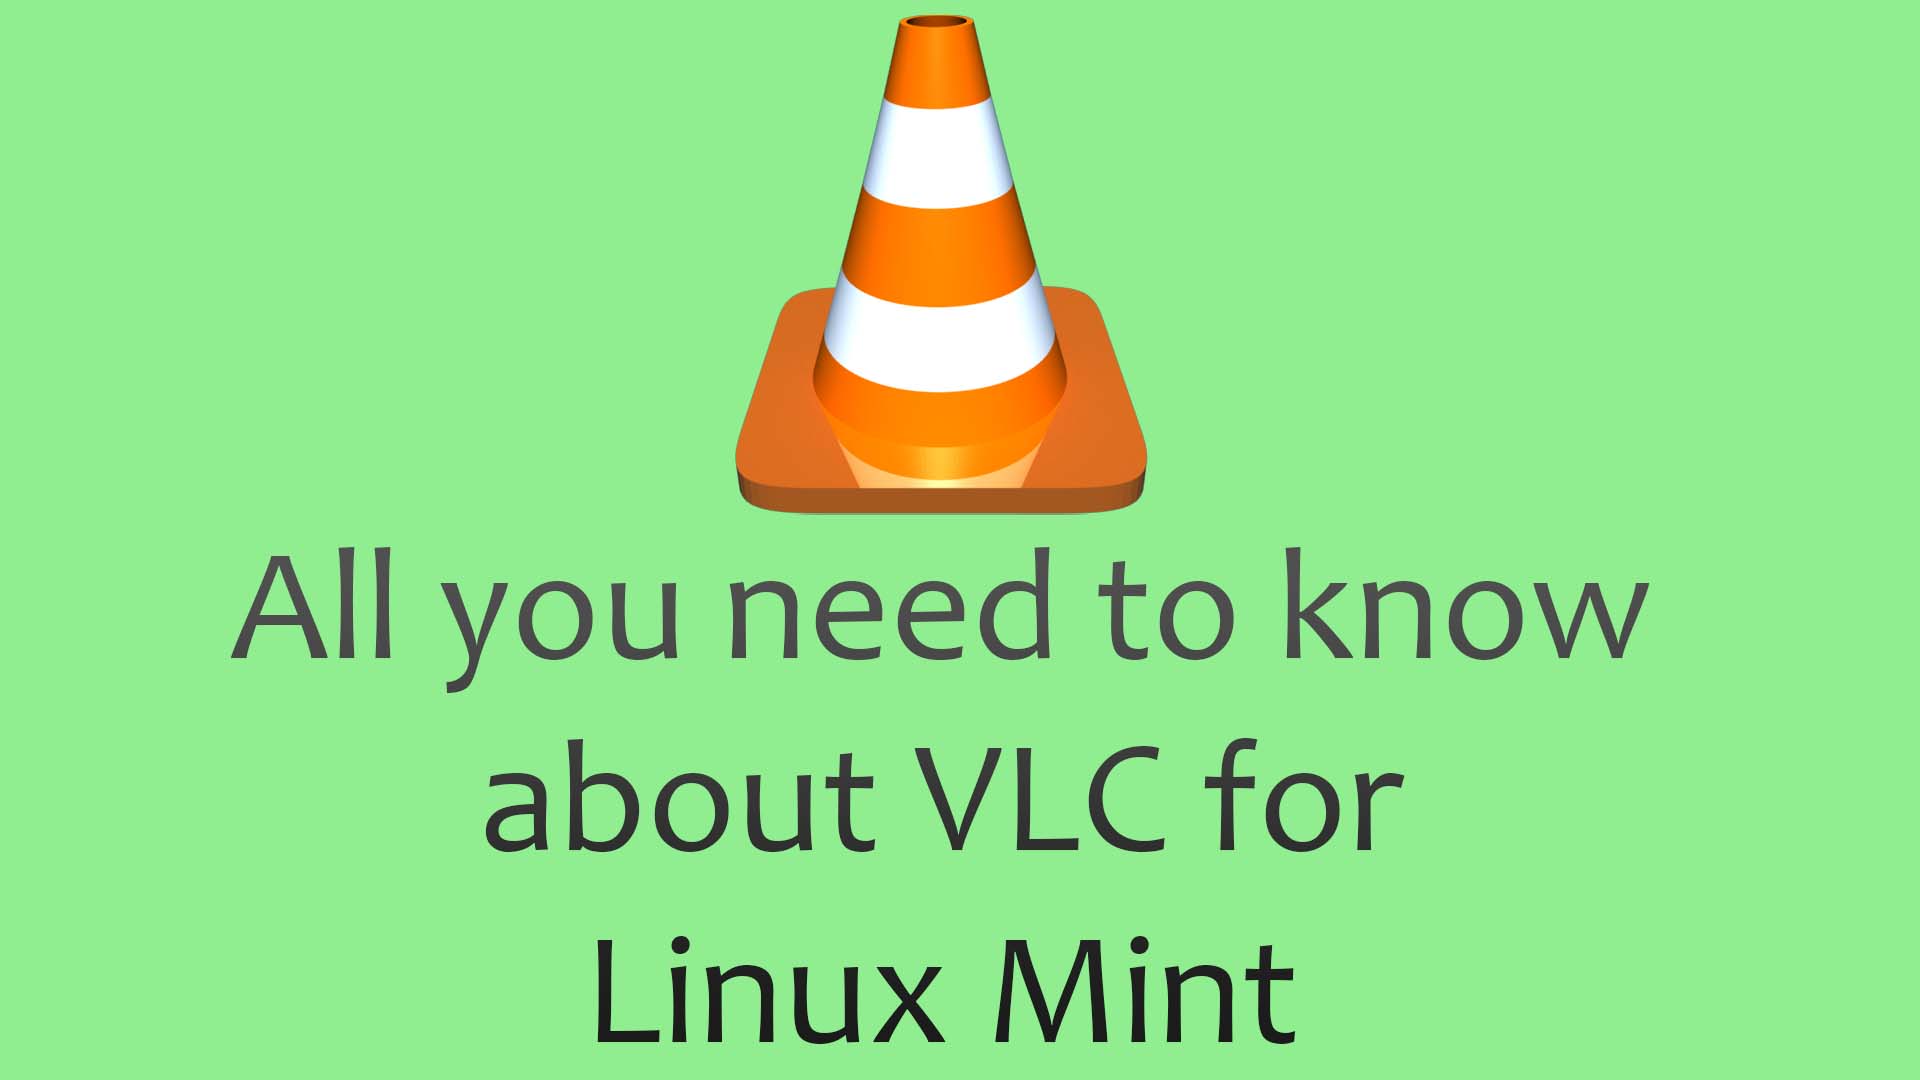 vlc-for-linux-mint